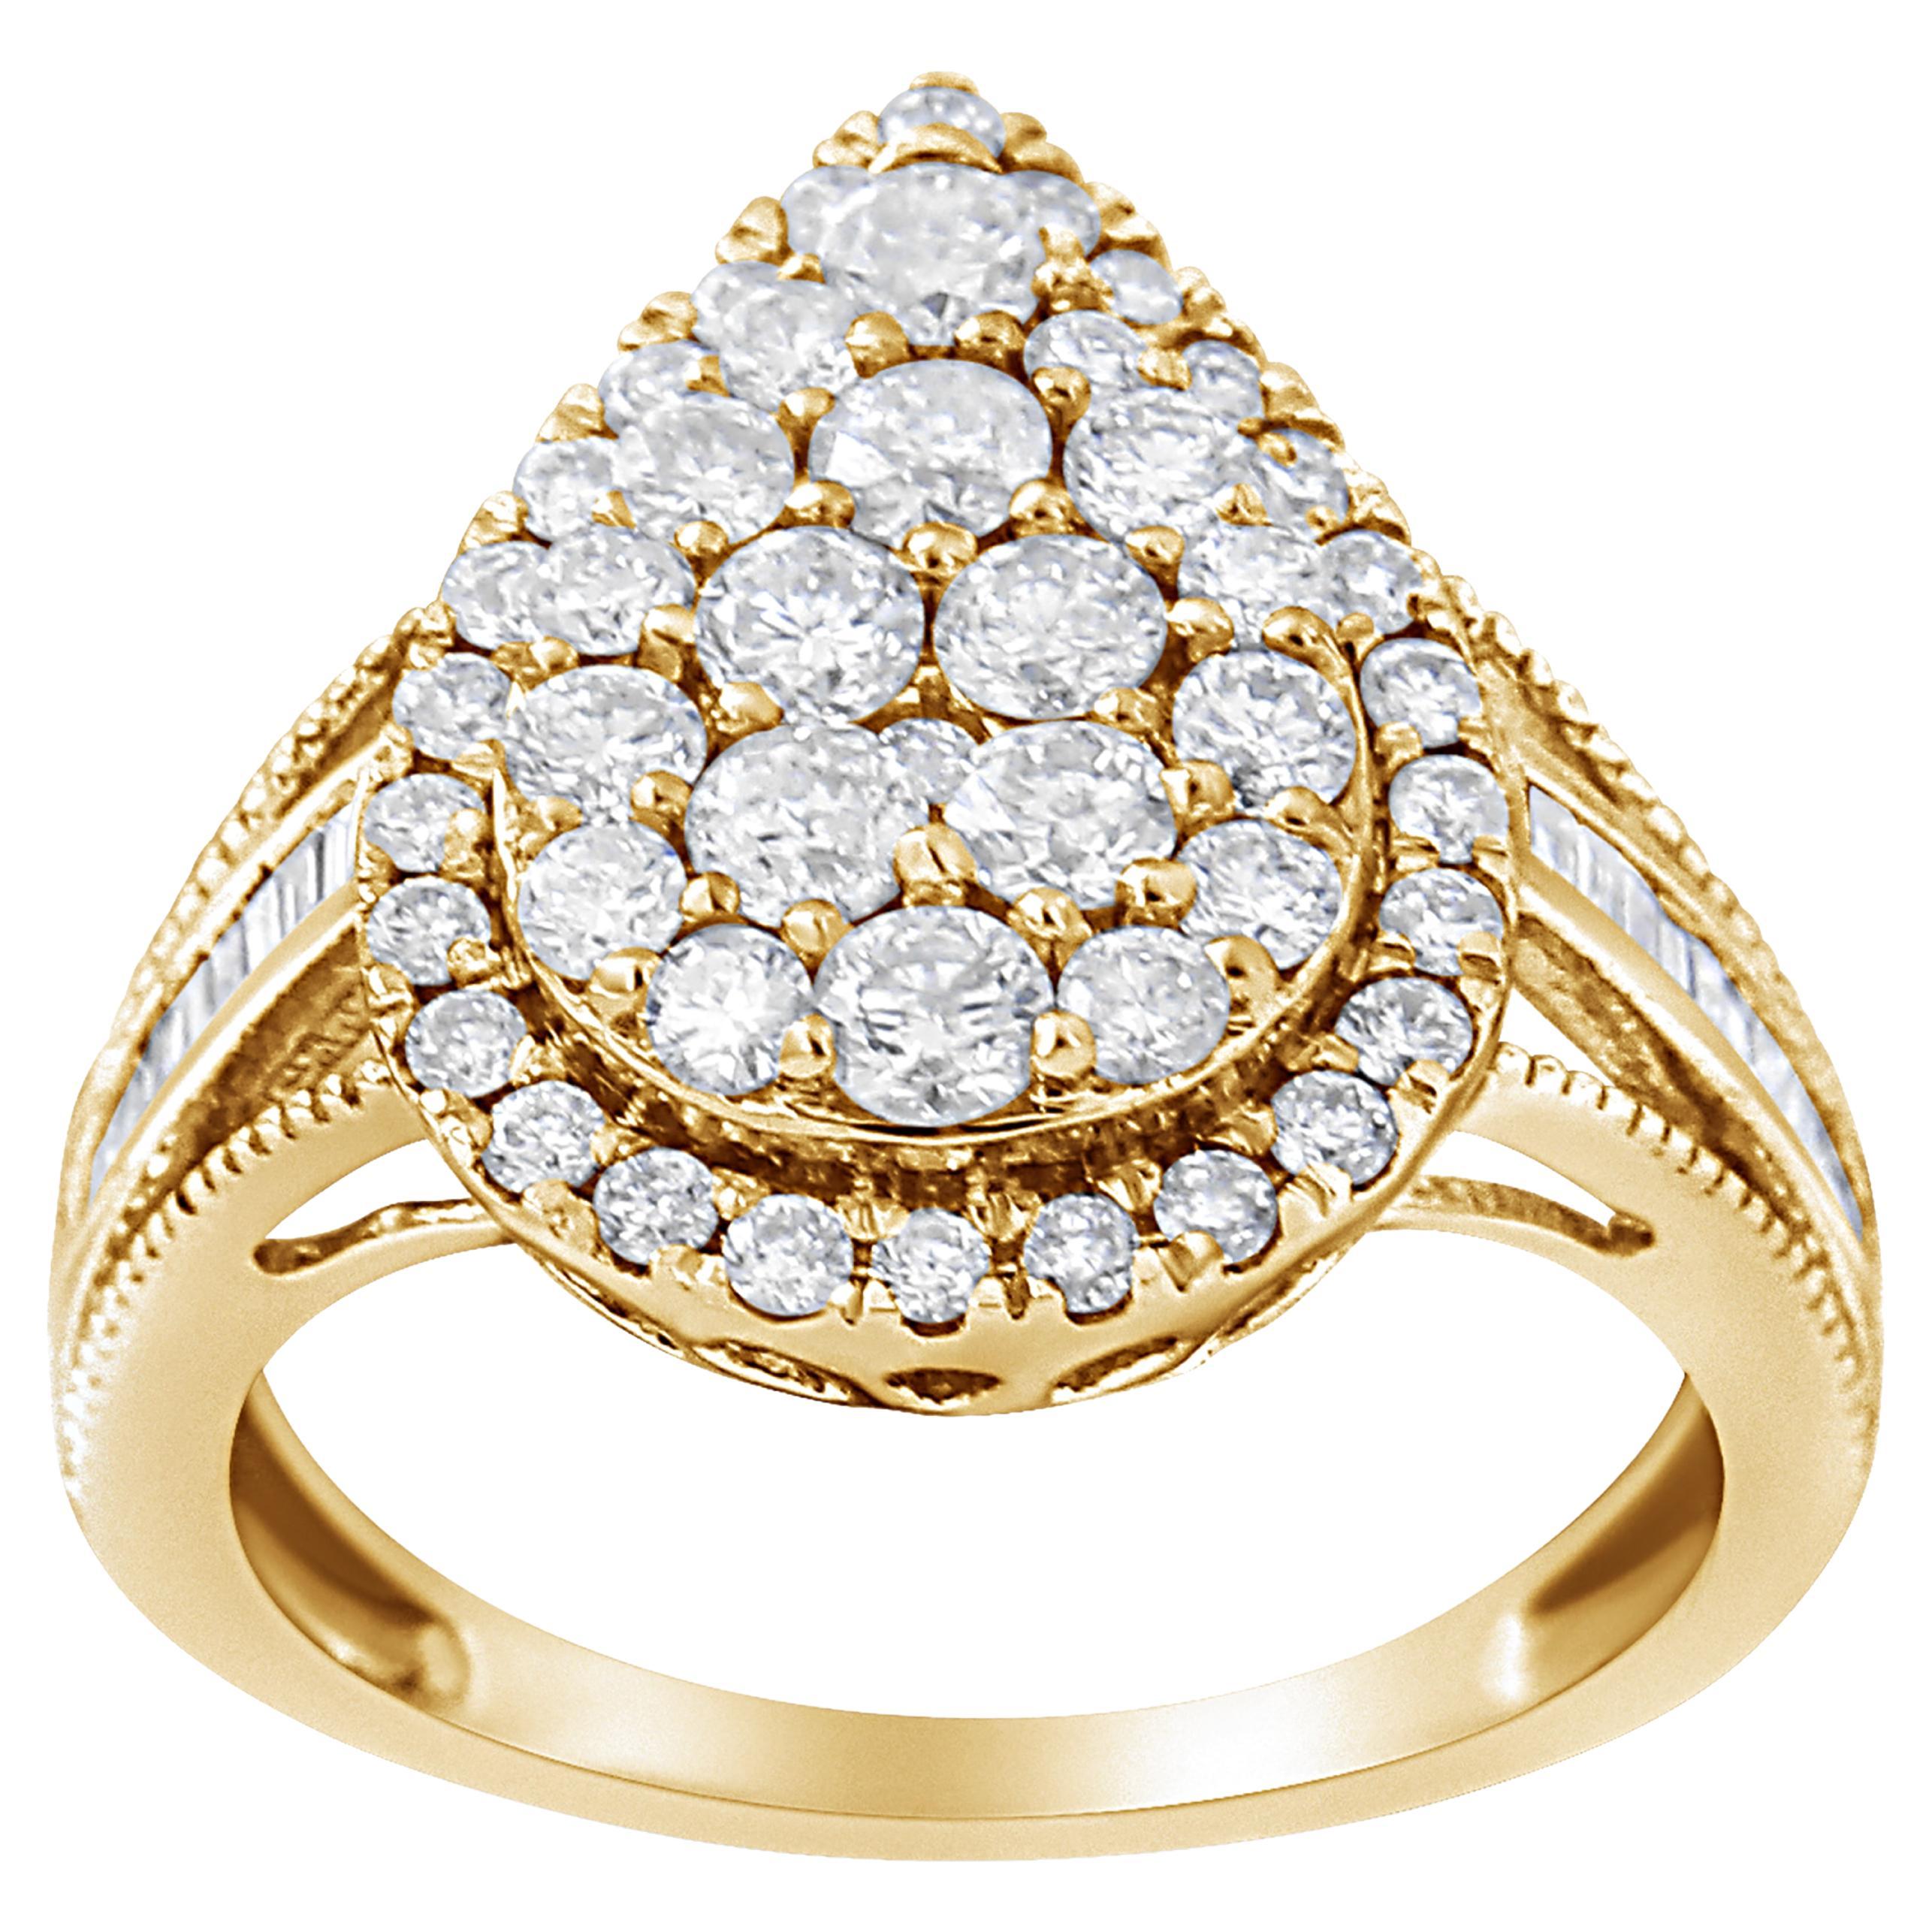 For Sale:  10K Yellow Gold over Silver 1 1/2 Carat Round-Cut Diamond Cocktail Ring